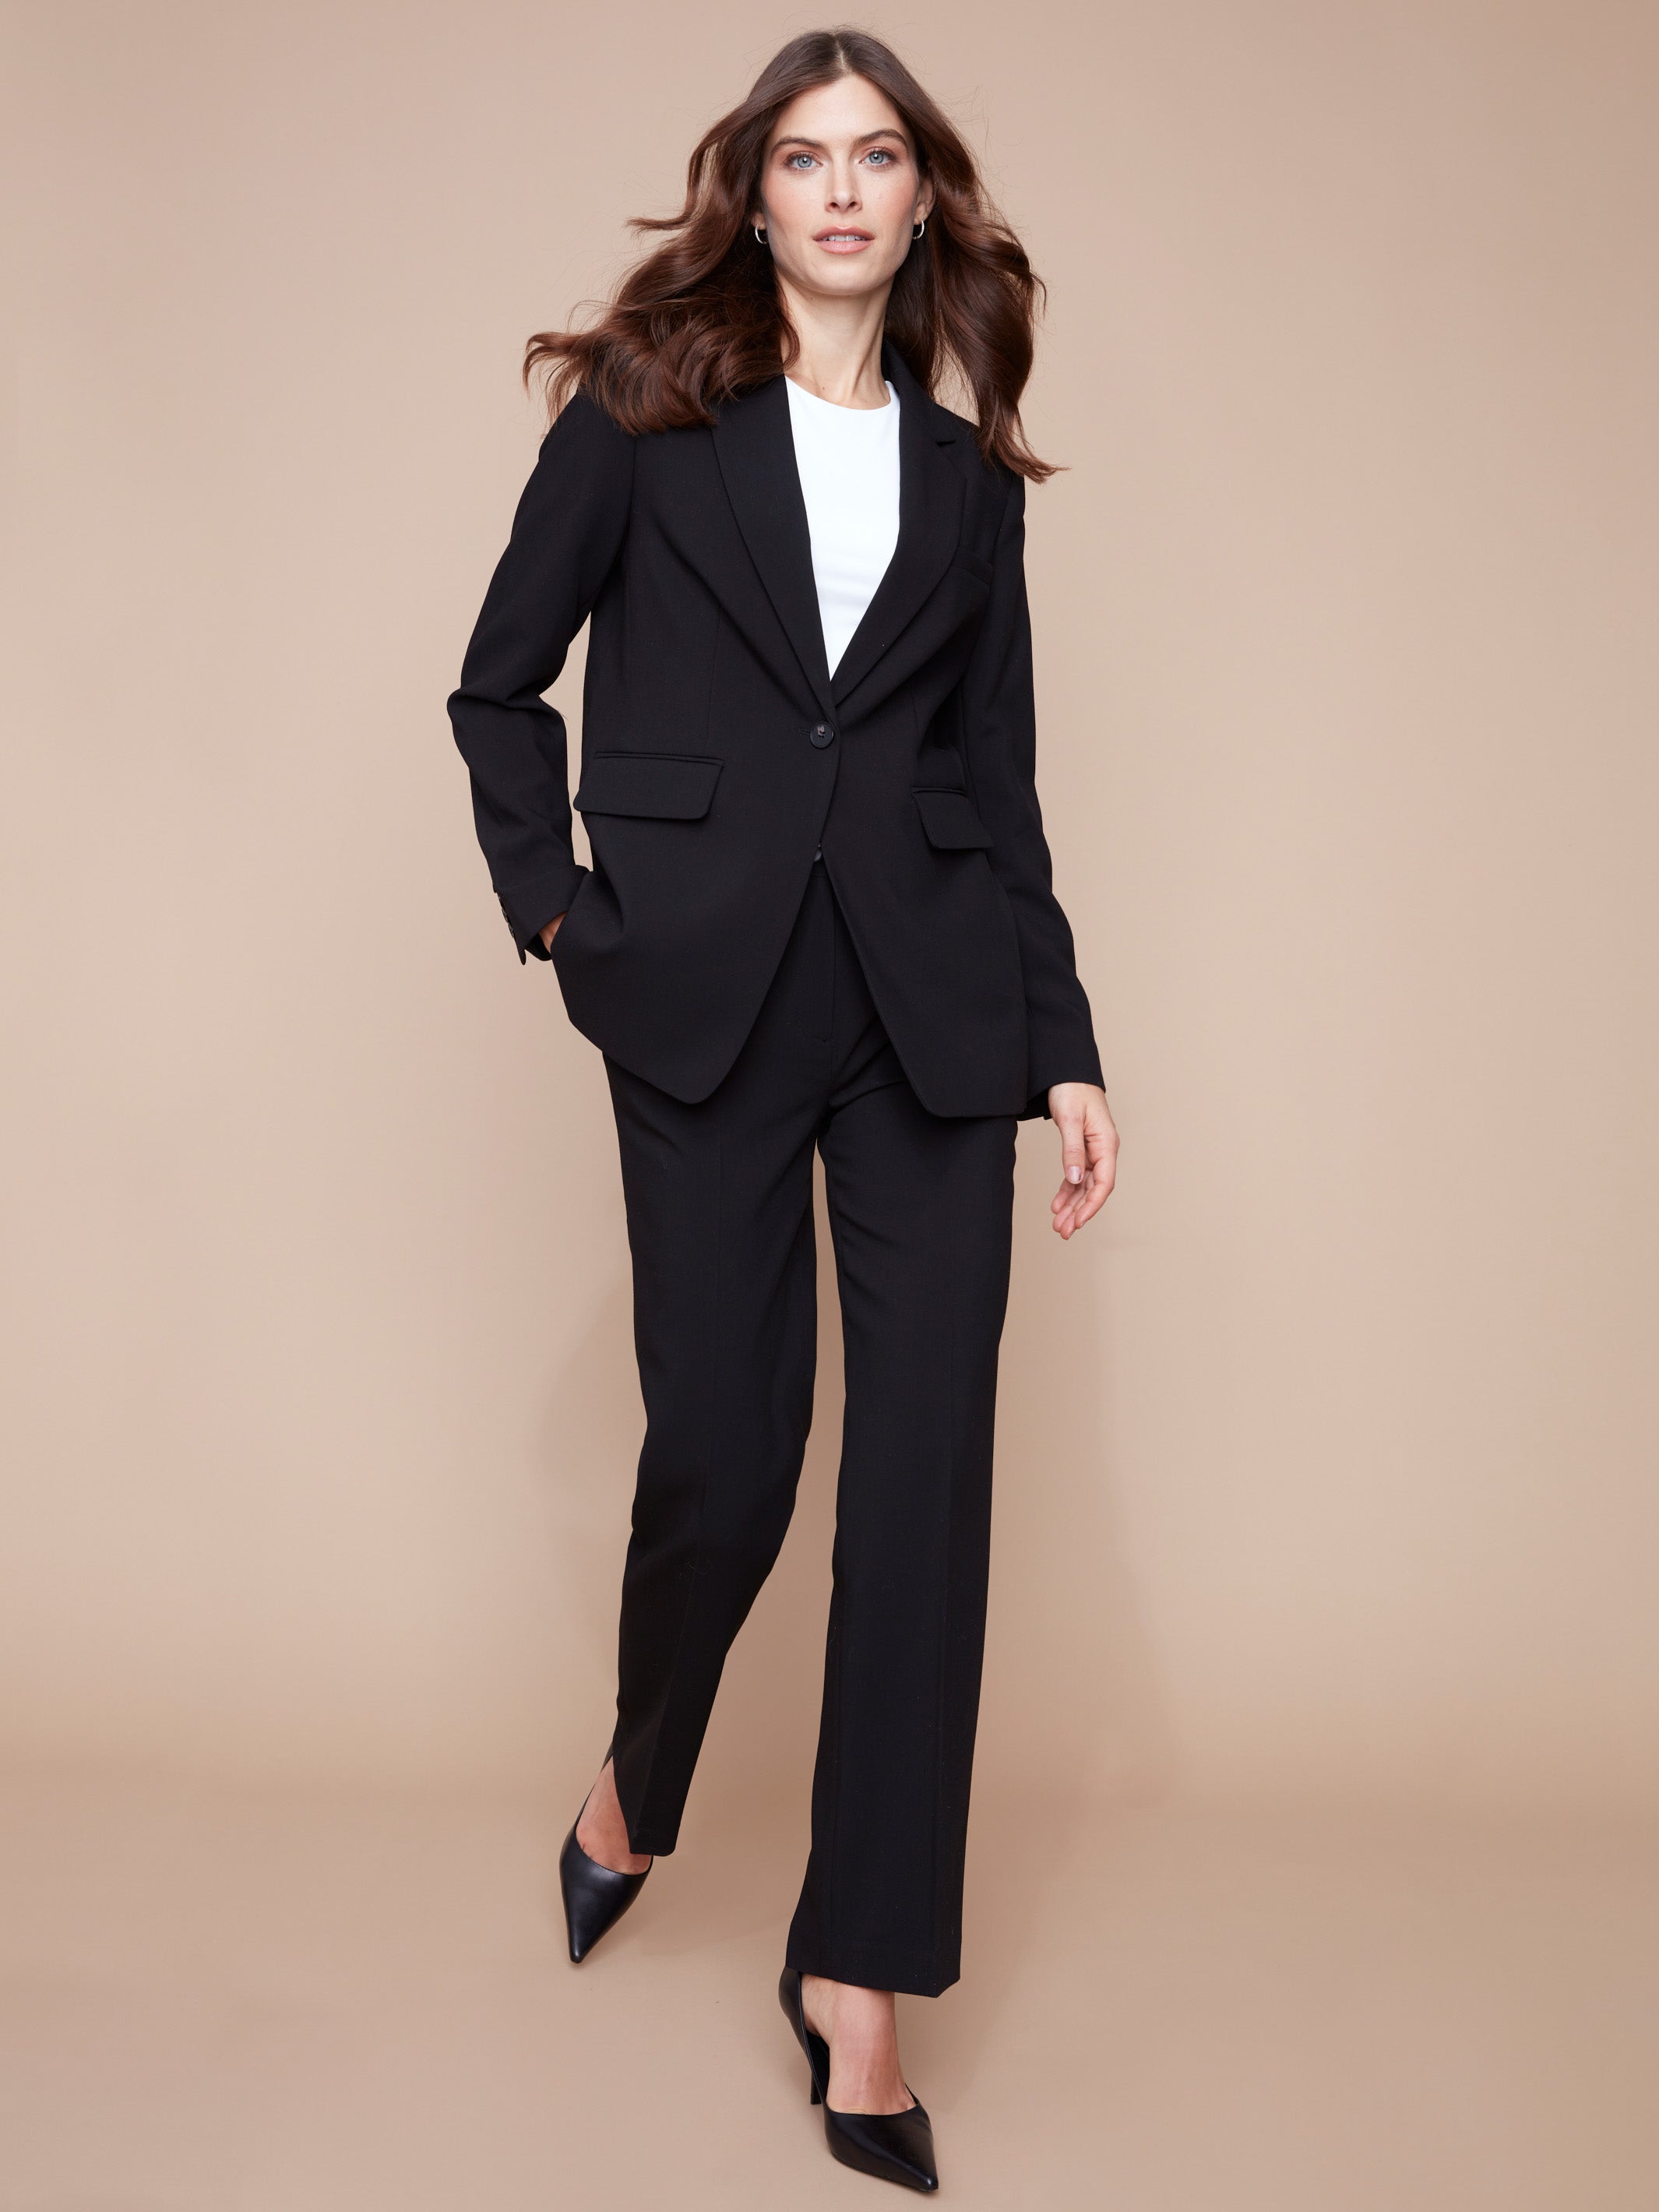 Women's Workwear Collection - Blazers, Pants, Tops & Outfits for Work - Charlie B Canada